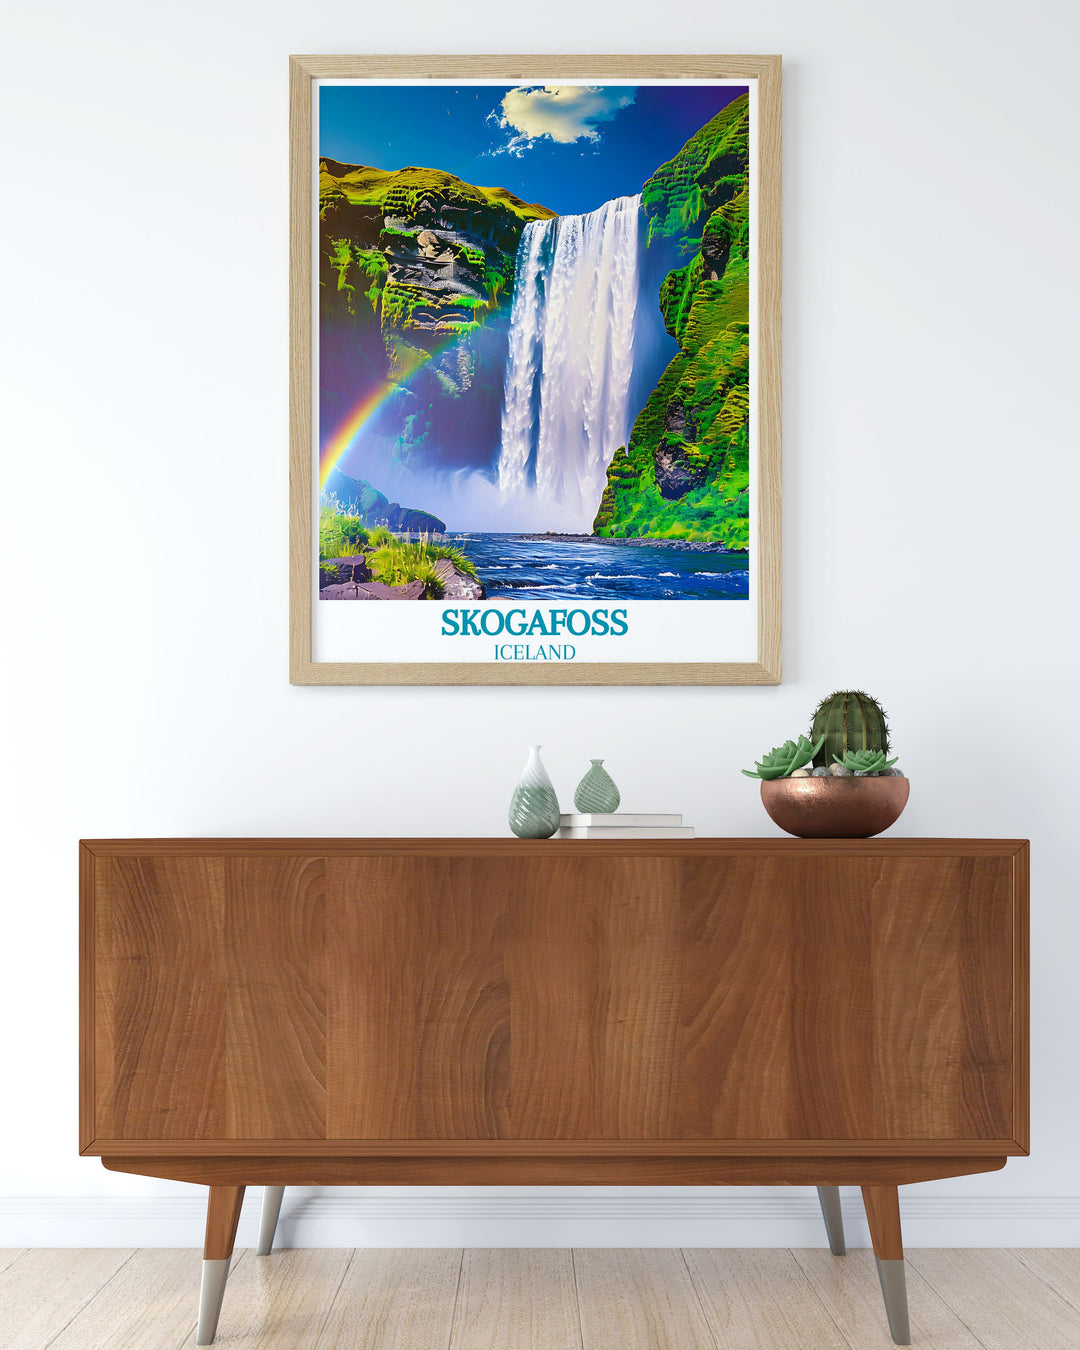 Reveal the captivating charm of Skogafoss with this travel poster, illustrating the majestic waterfall and the magical rainbow that graces its mist.